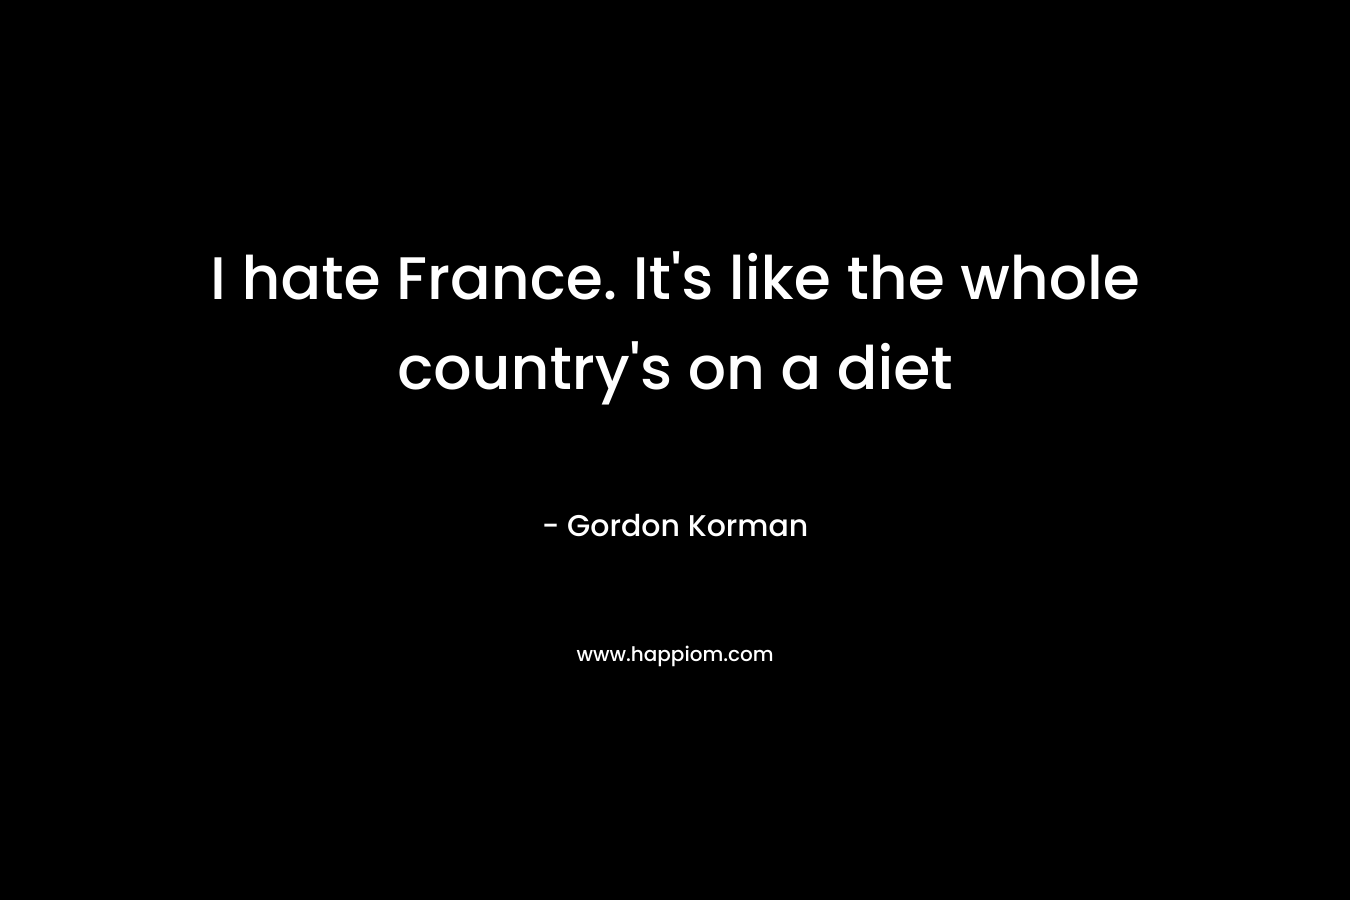 I hate France. It's like the whole country's on a diet